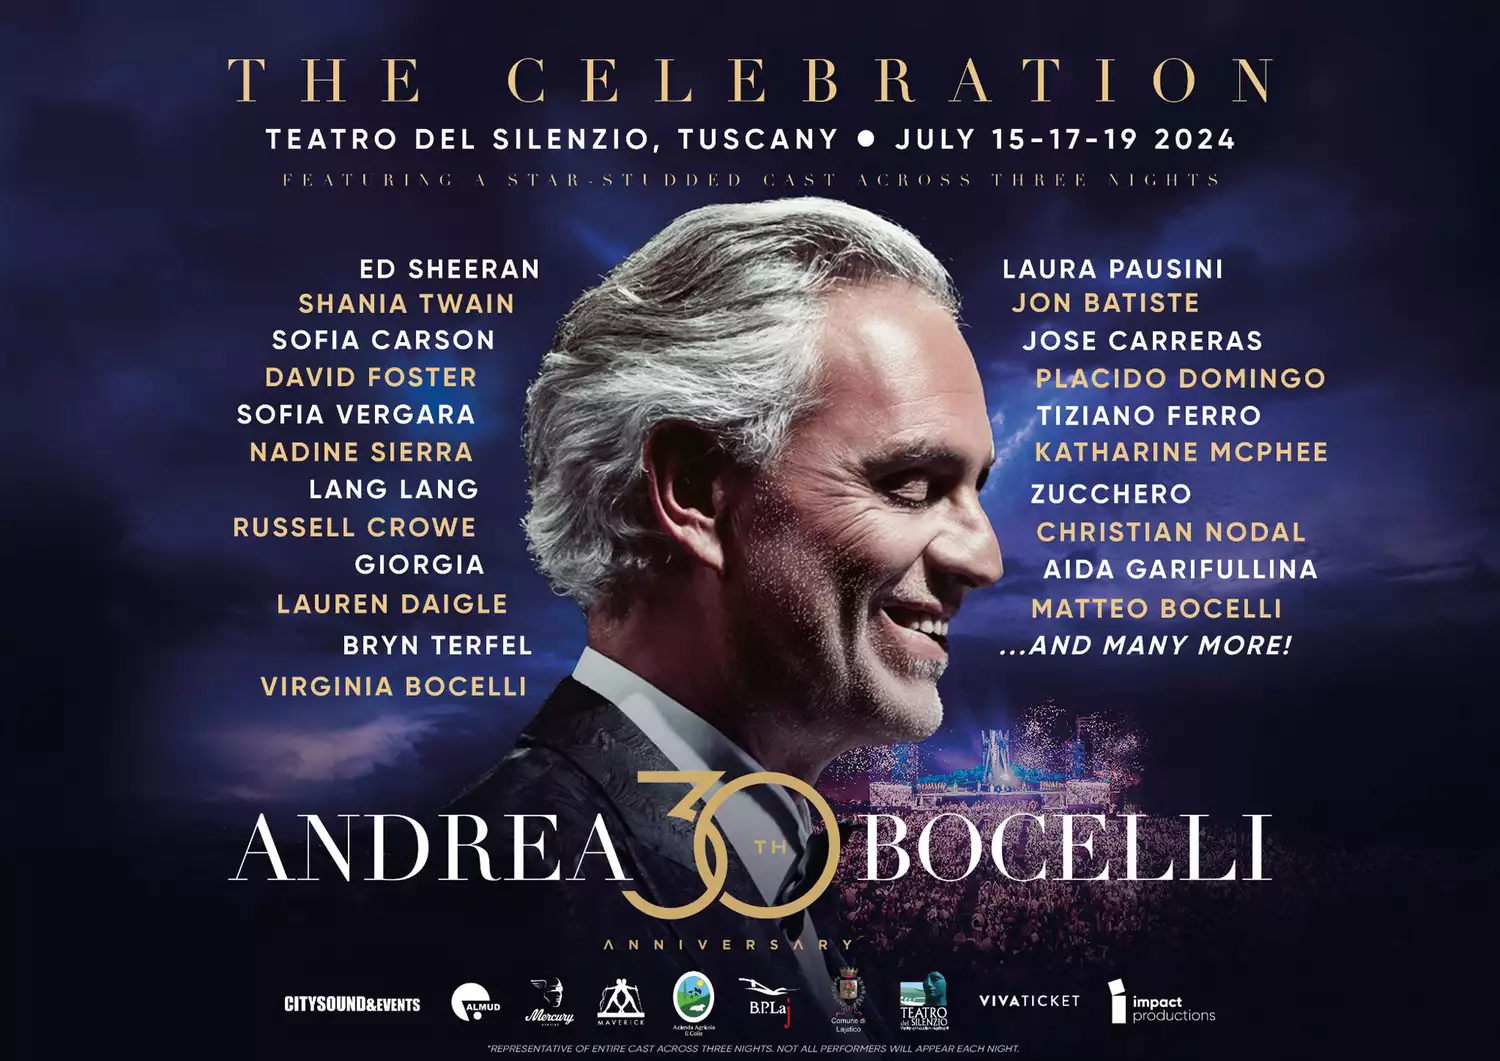 Andrea Bocelli Celebrates 30 Years in Music with Spectacular Three-Day Event